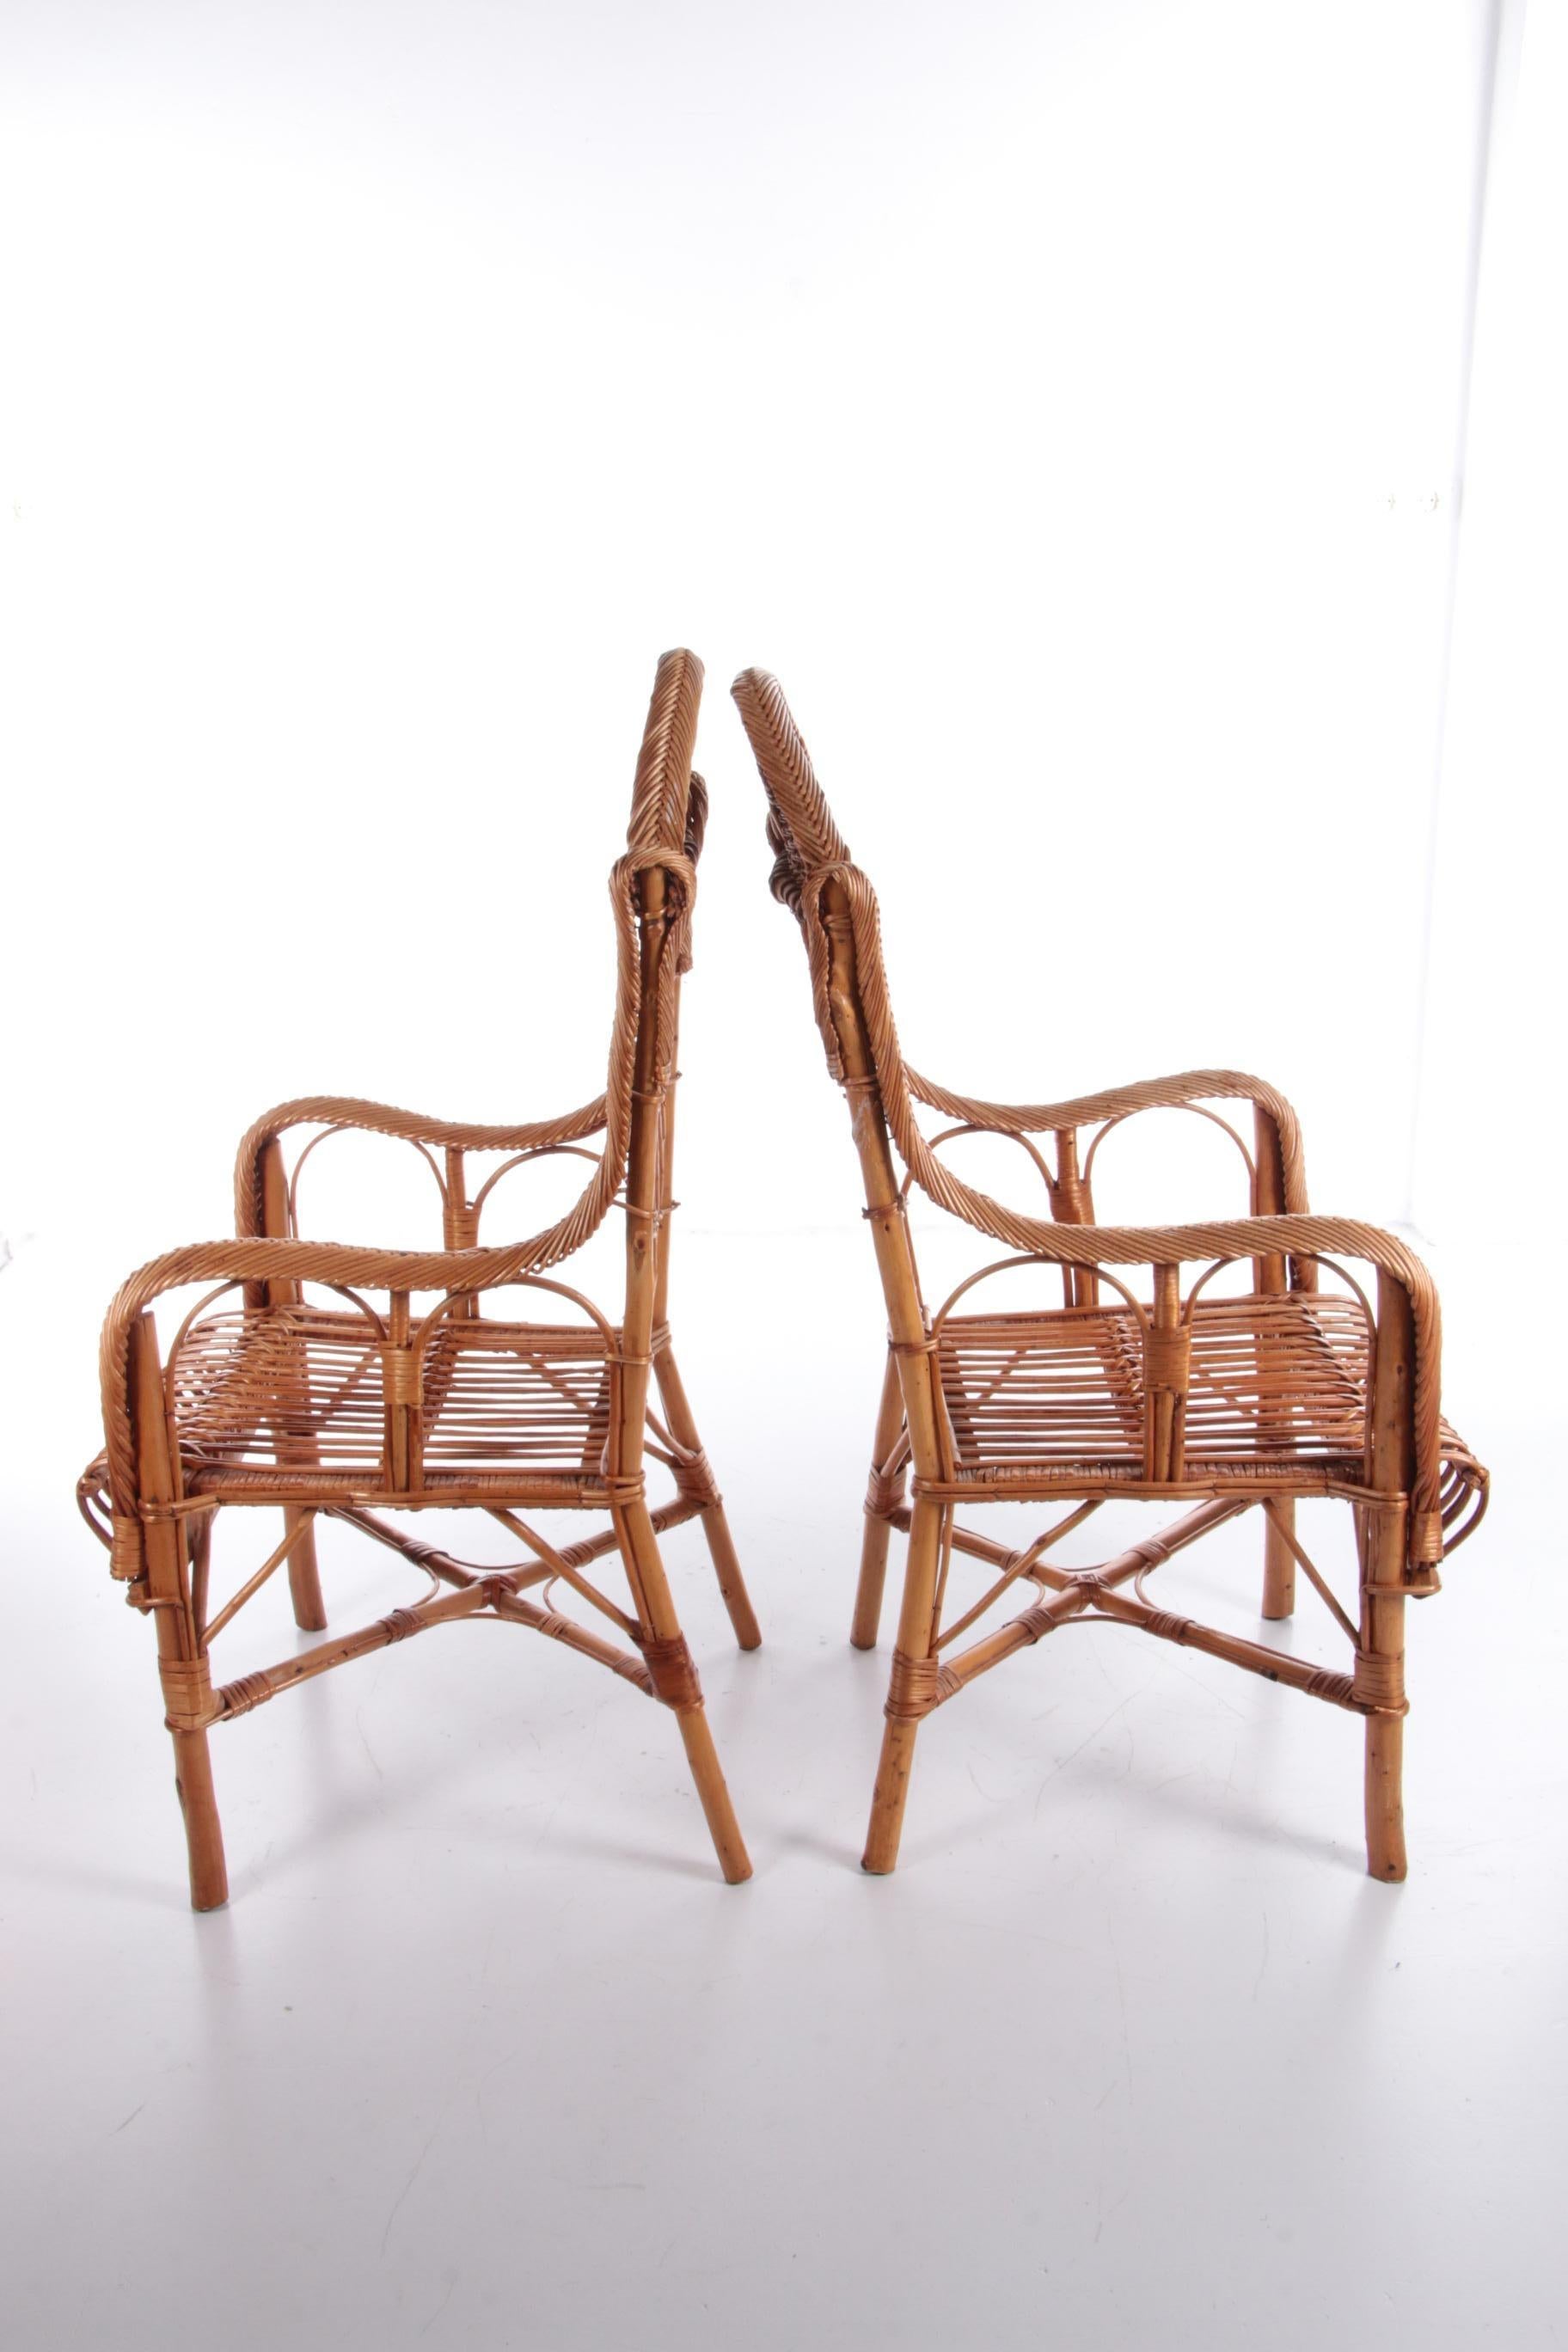 Dutch Vintage Set of 2 Rattan Chairs Made Around 1960s, the Netherlands For Sale